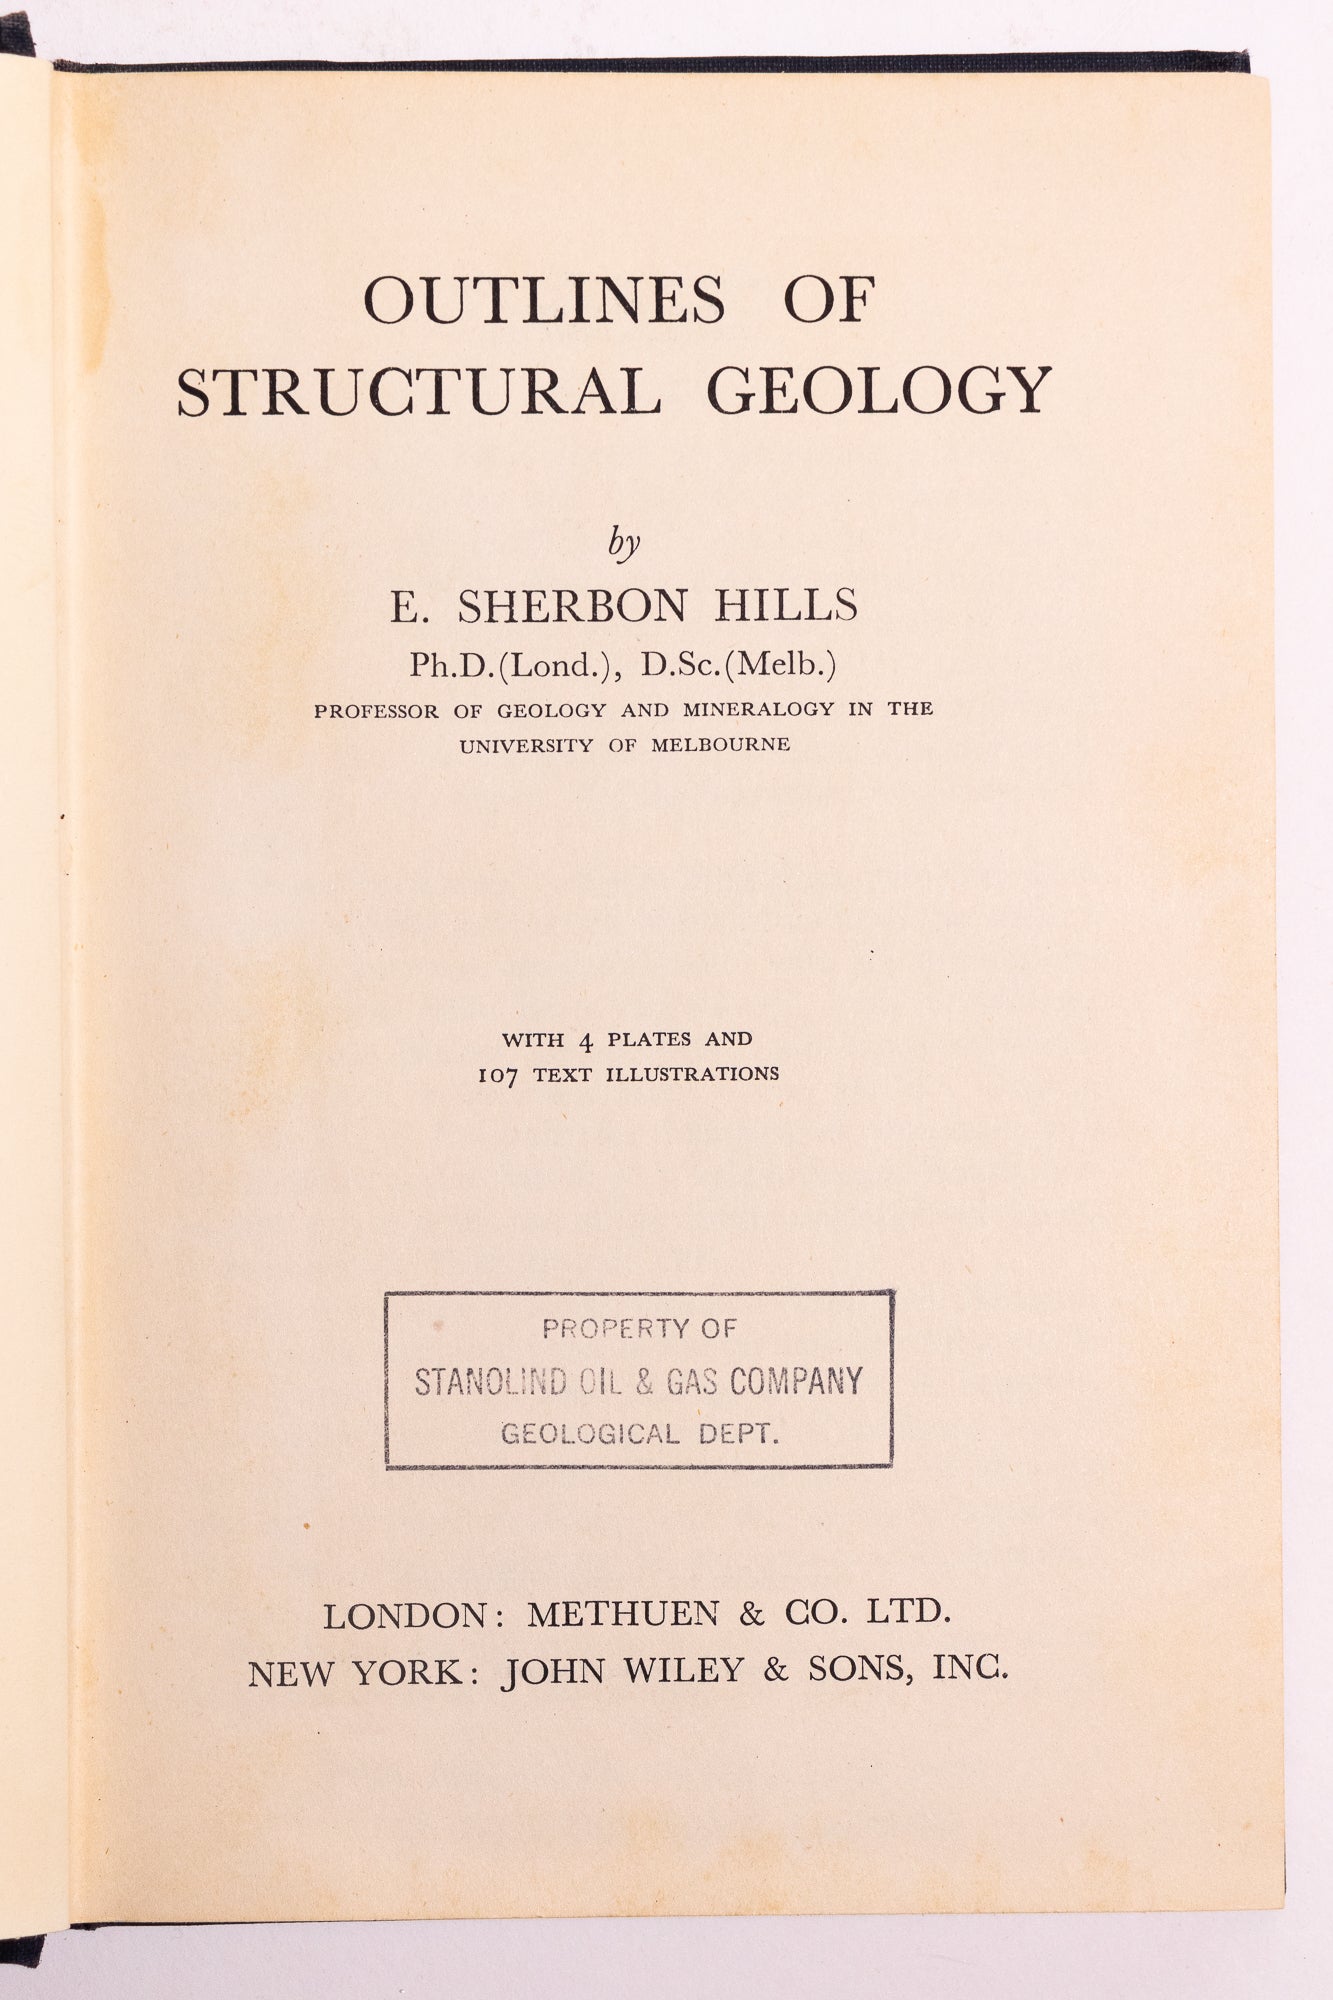 Outlines of Structural Geology - Stemcell Science Shop